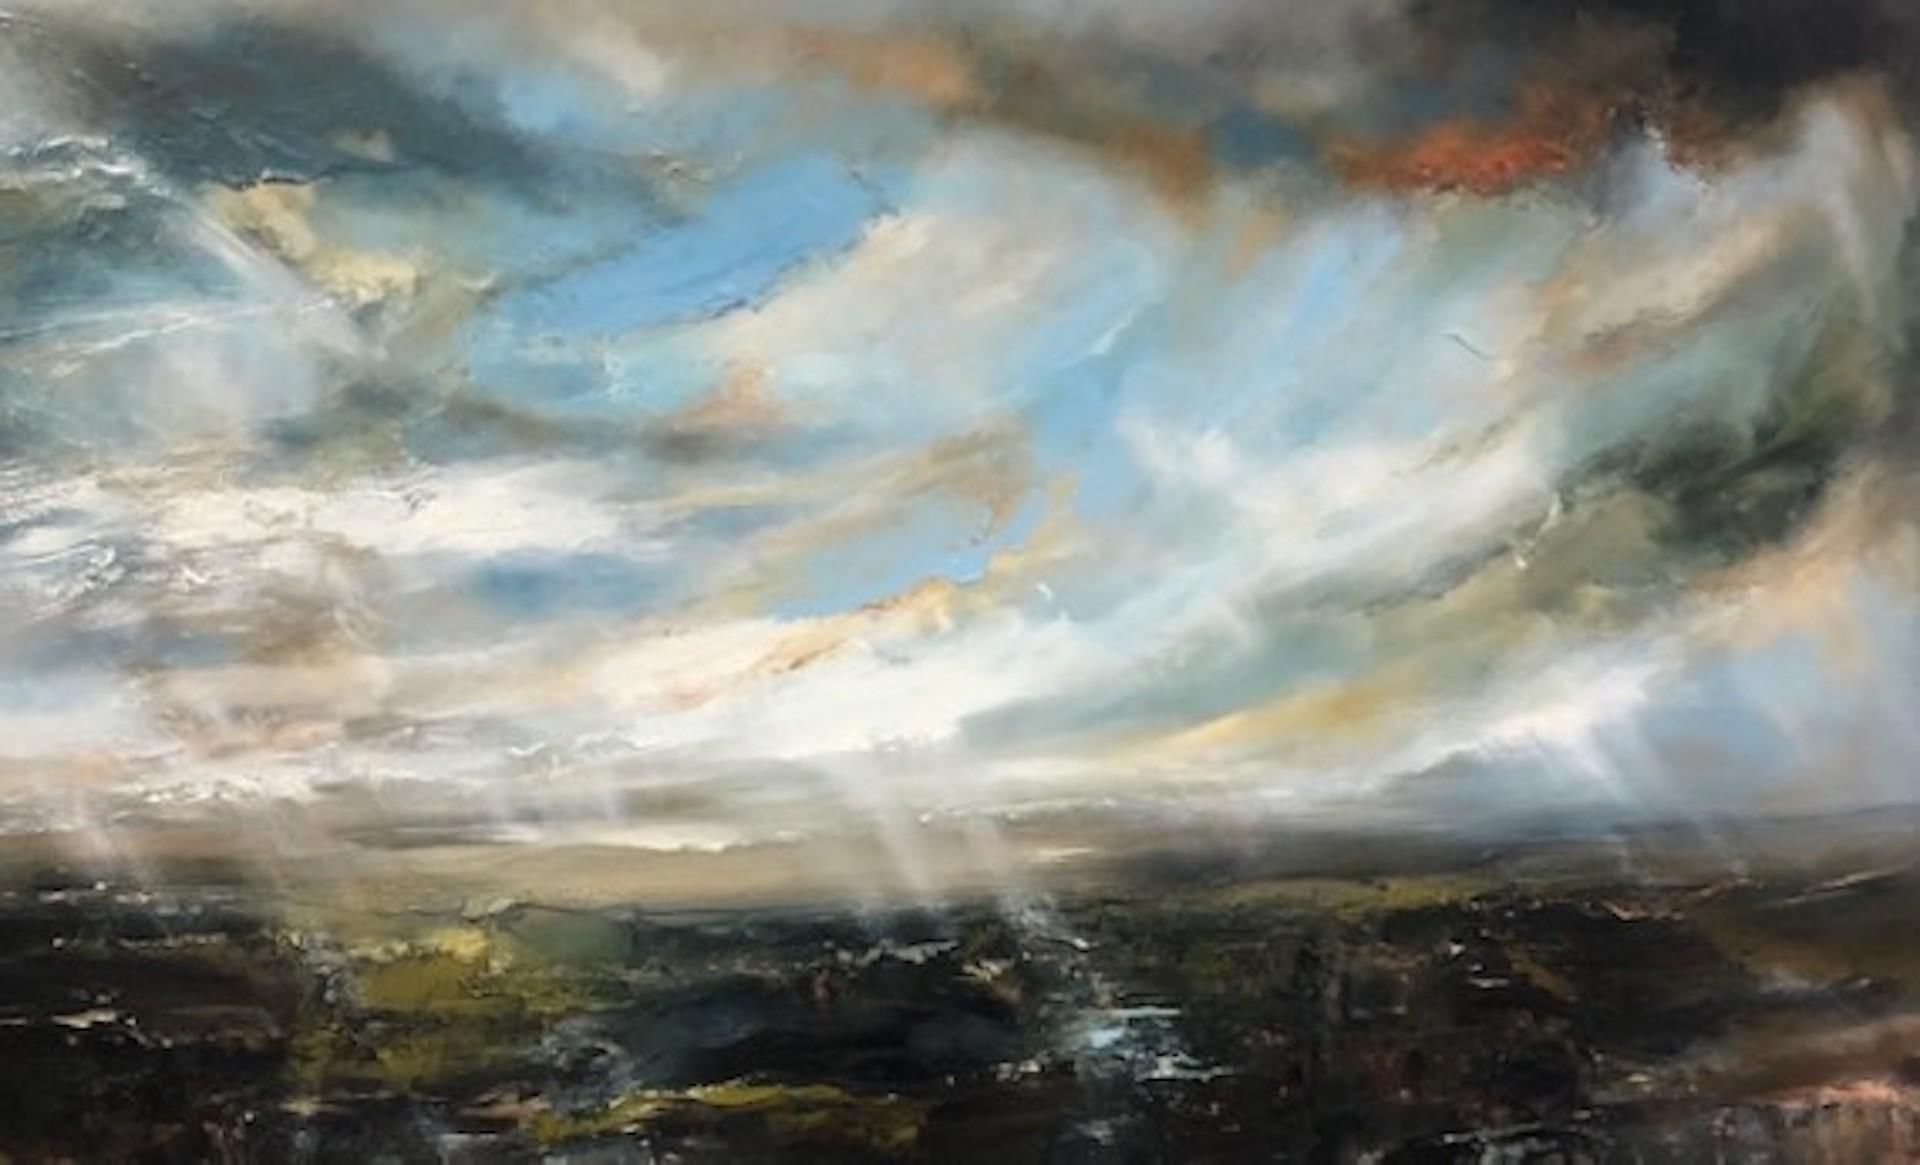 A Call Across The Valley [2020]
Original
Landscape
Oil On Canvas
Complete Size of Unframed Work: H:76 cm x W:122 cm x D:3.5cm
Sold Unframed
Please note that insitu images are purely an indication of how a piece may look

A Call Across The Valley is